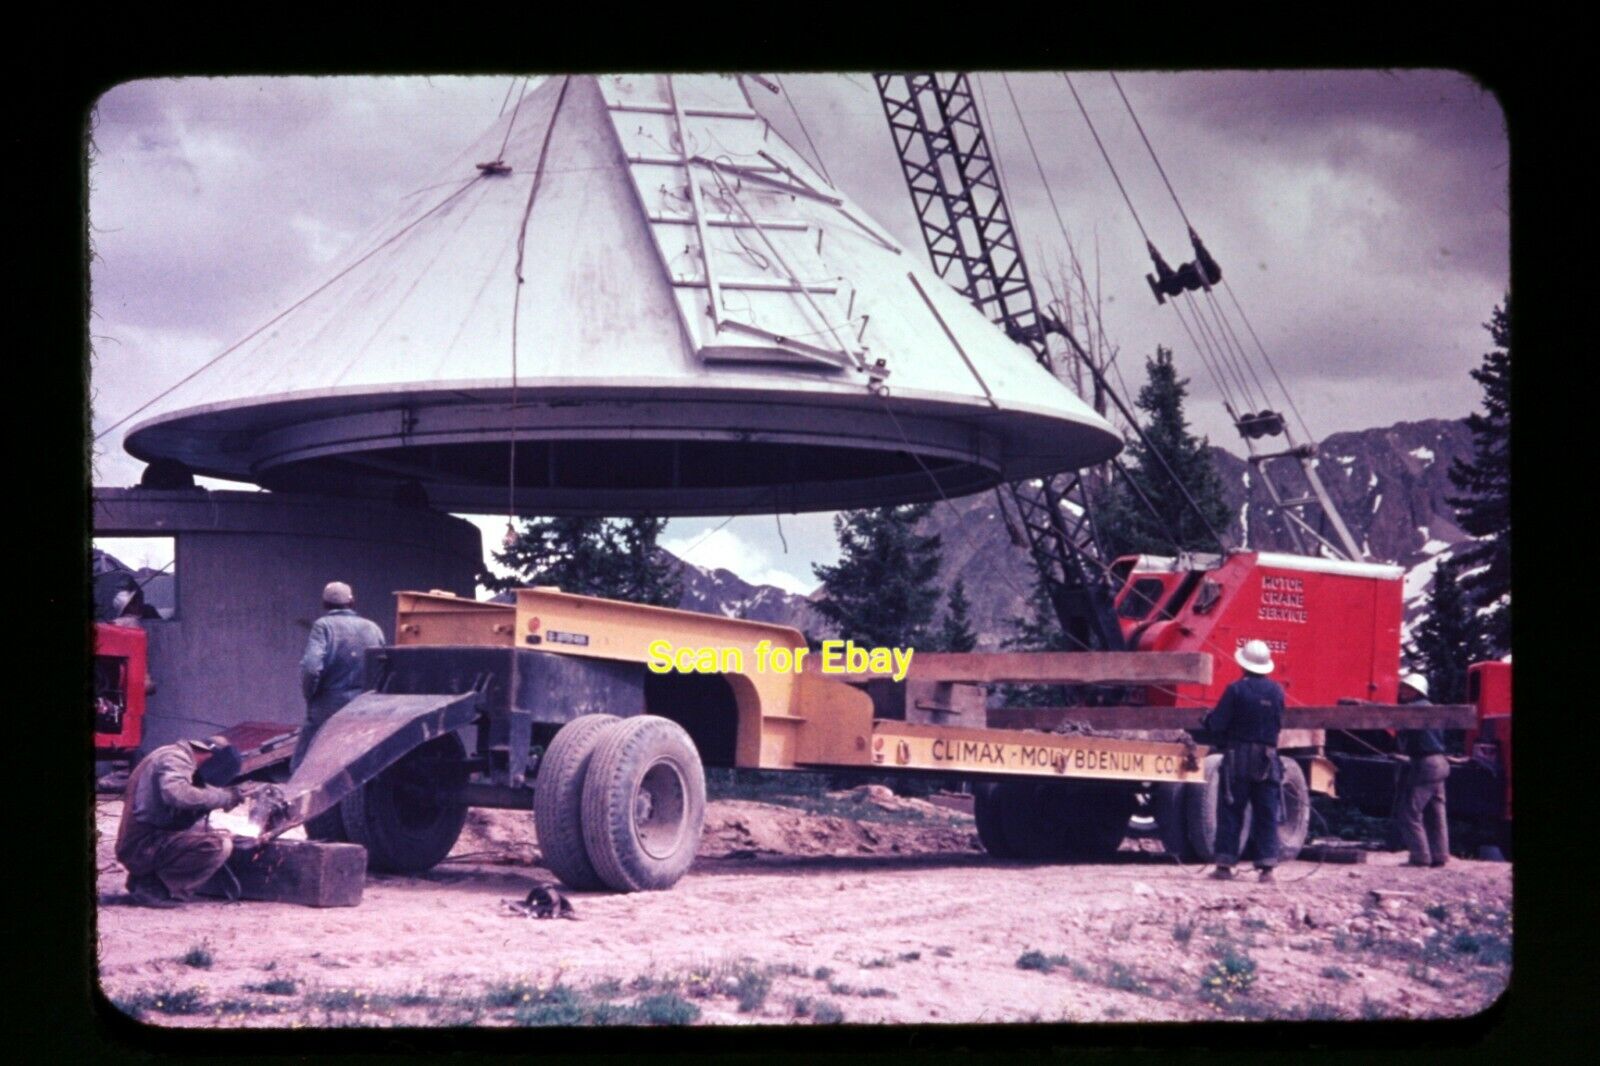 Solar Observatory, Truck Crane in New Mexico in 1940's, Original Slide aa 3-12a